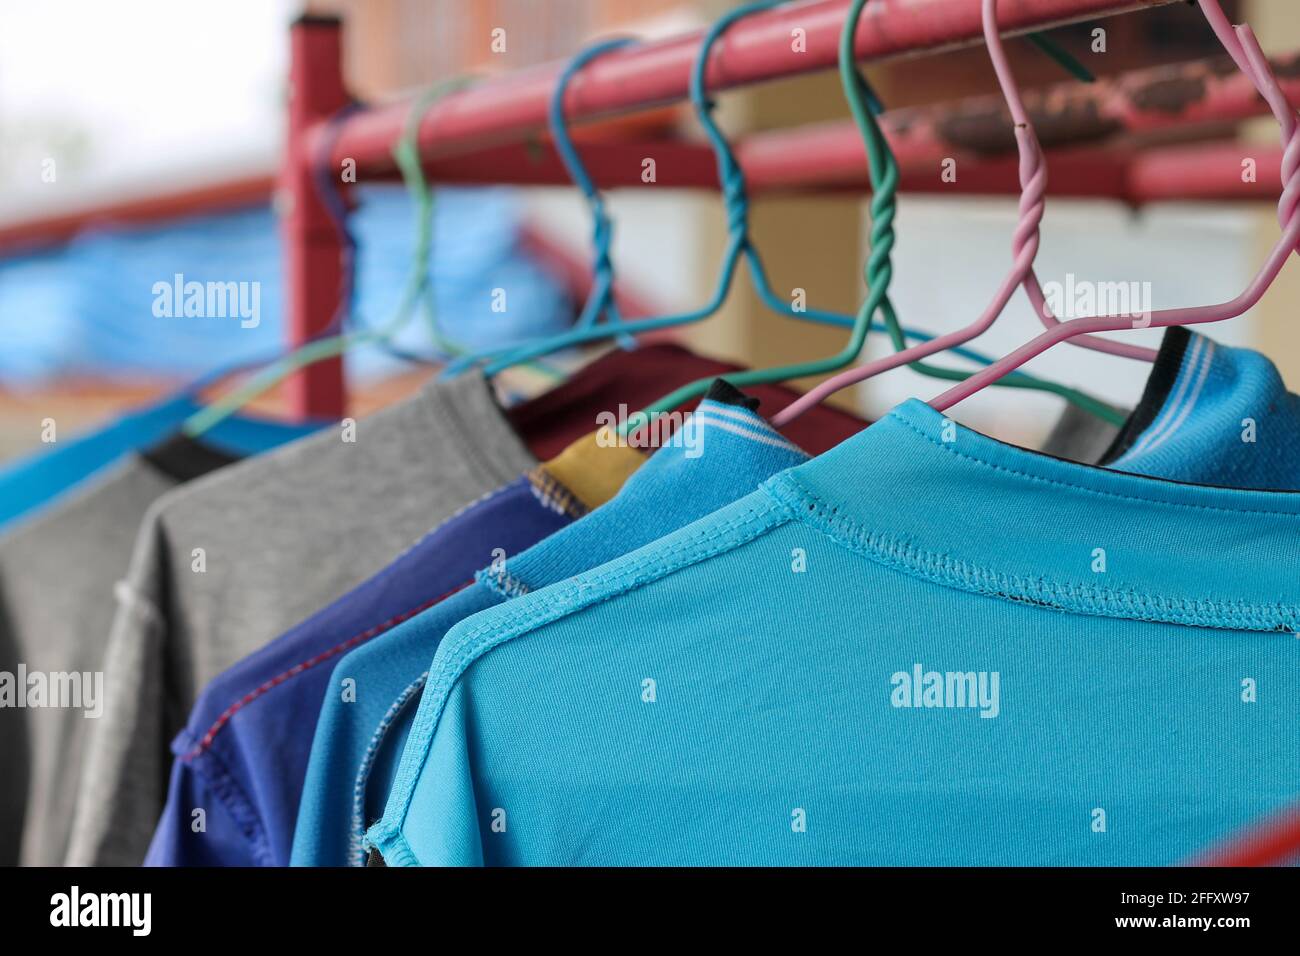 Dry clothes on hangers to dry on hot days. Stock Photo